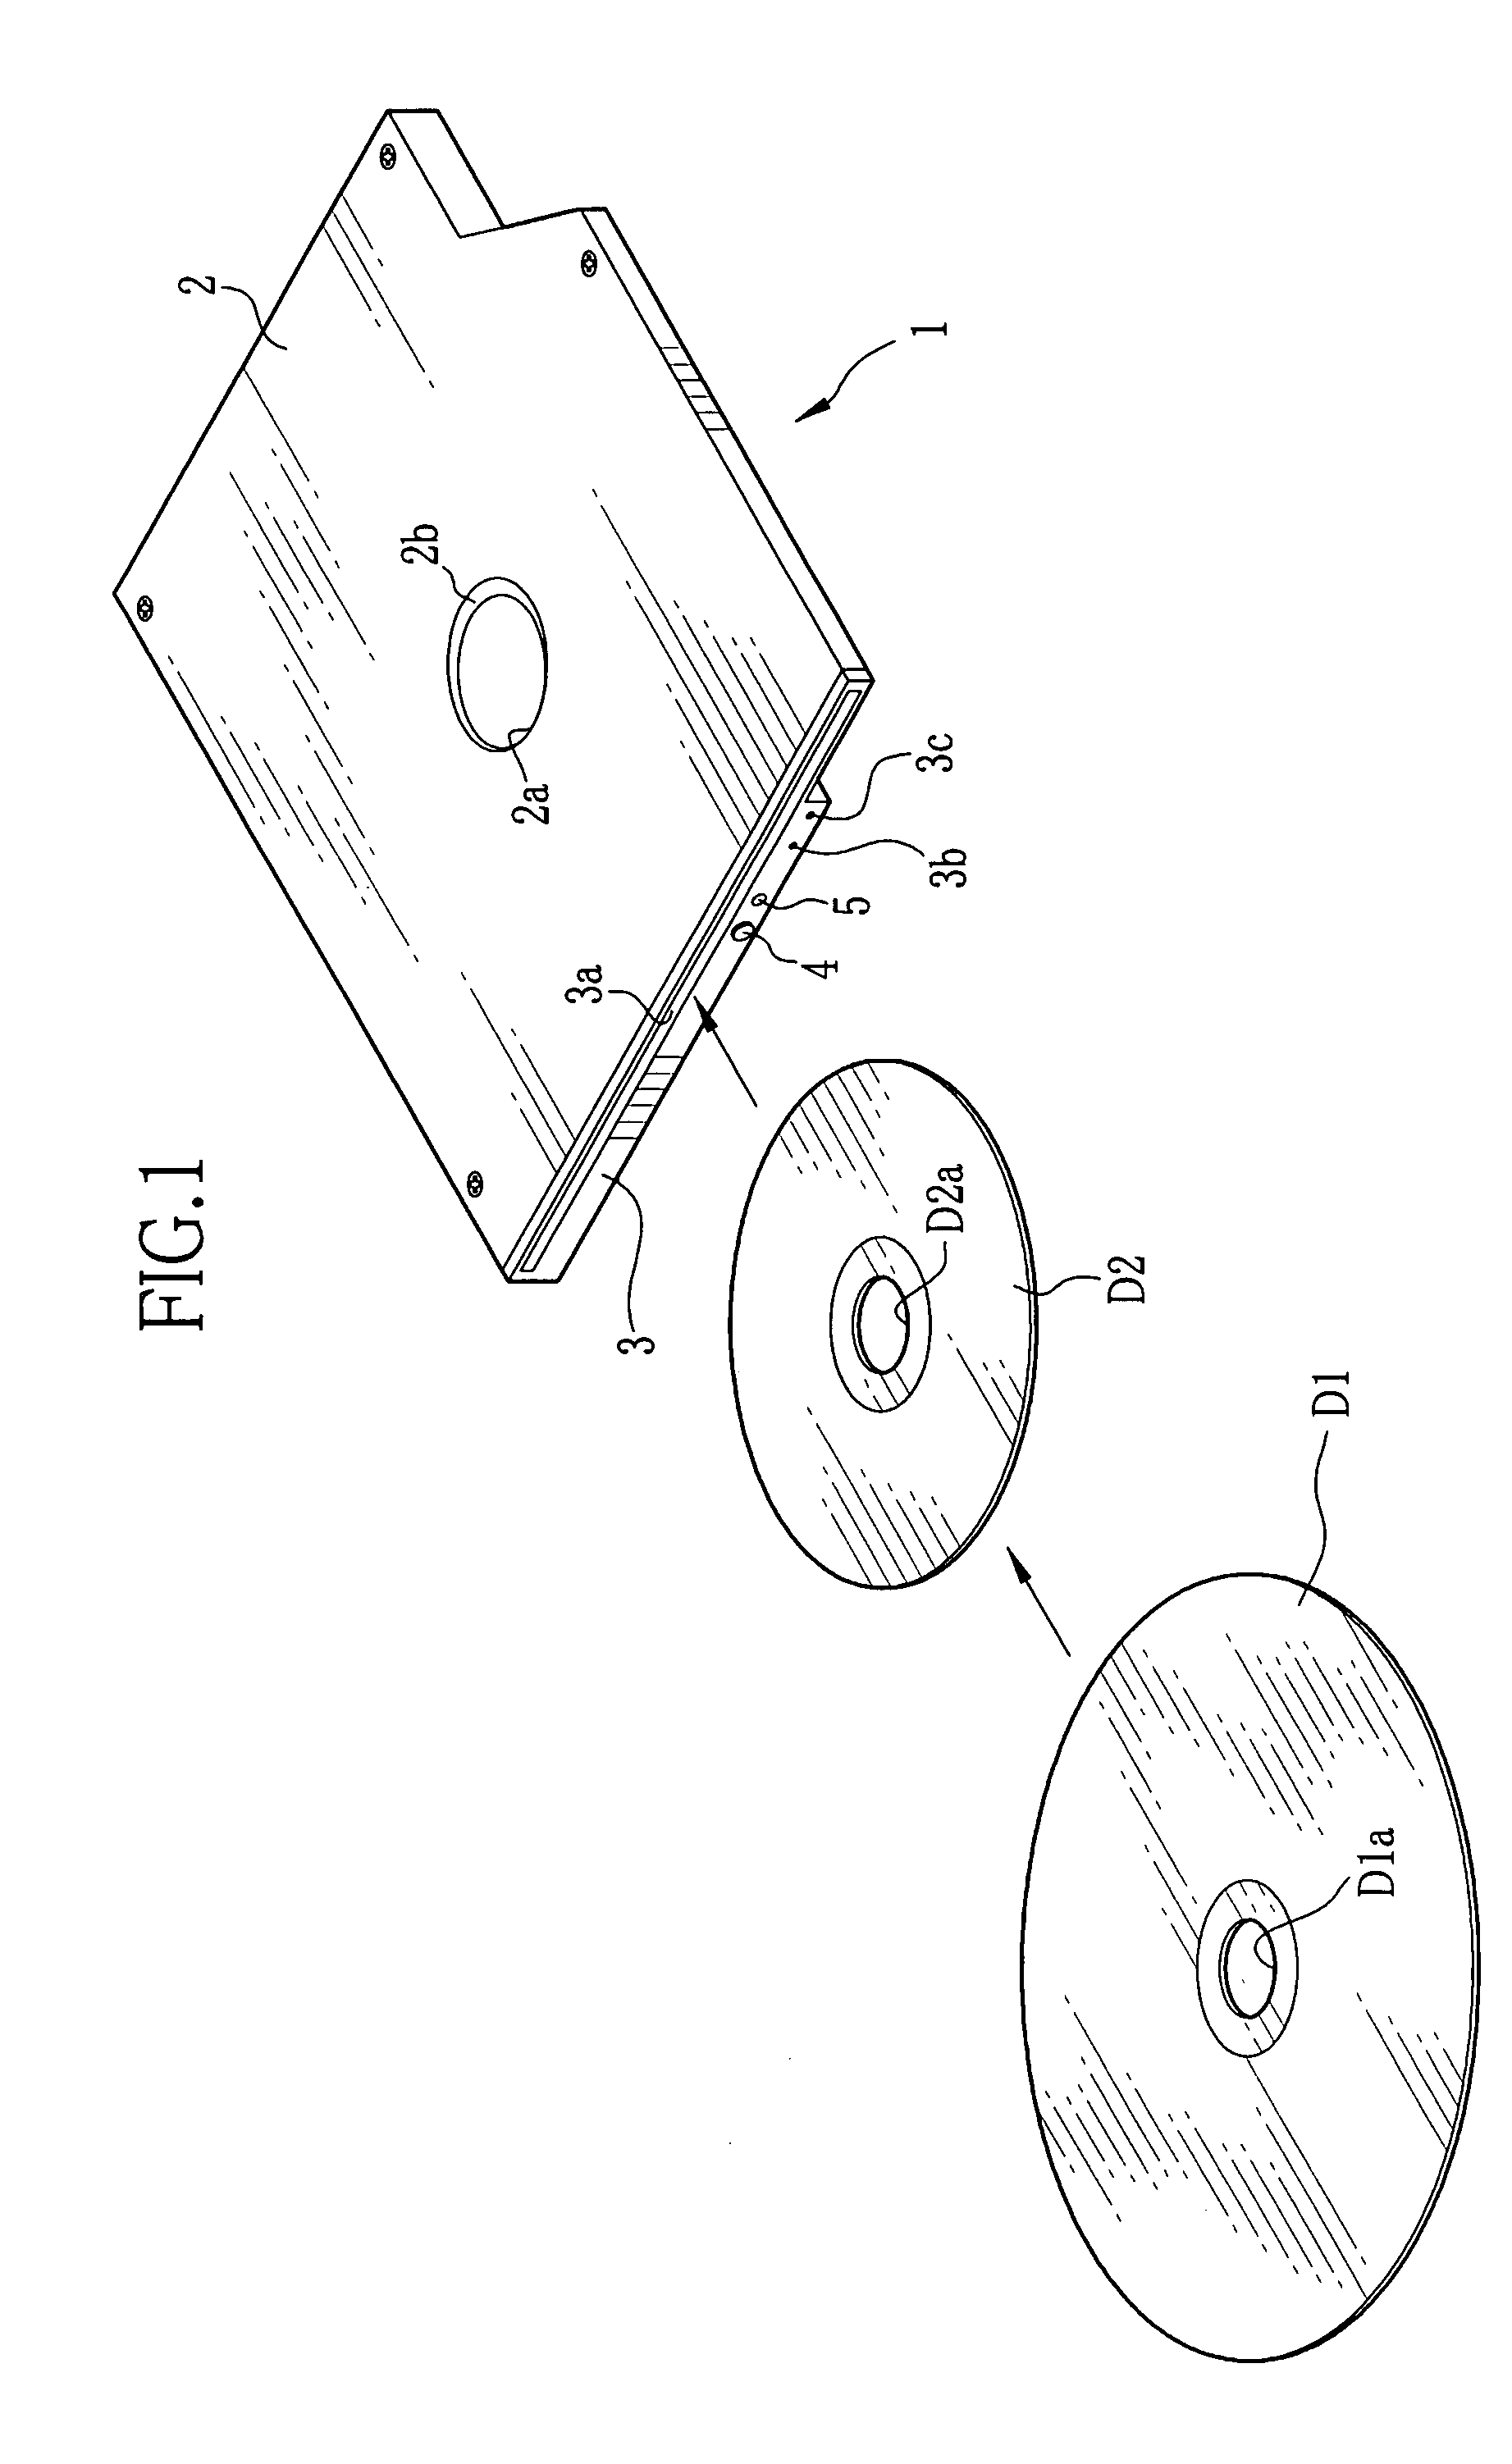 Disk device for loading and unloading disks of different sizes